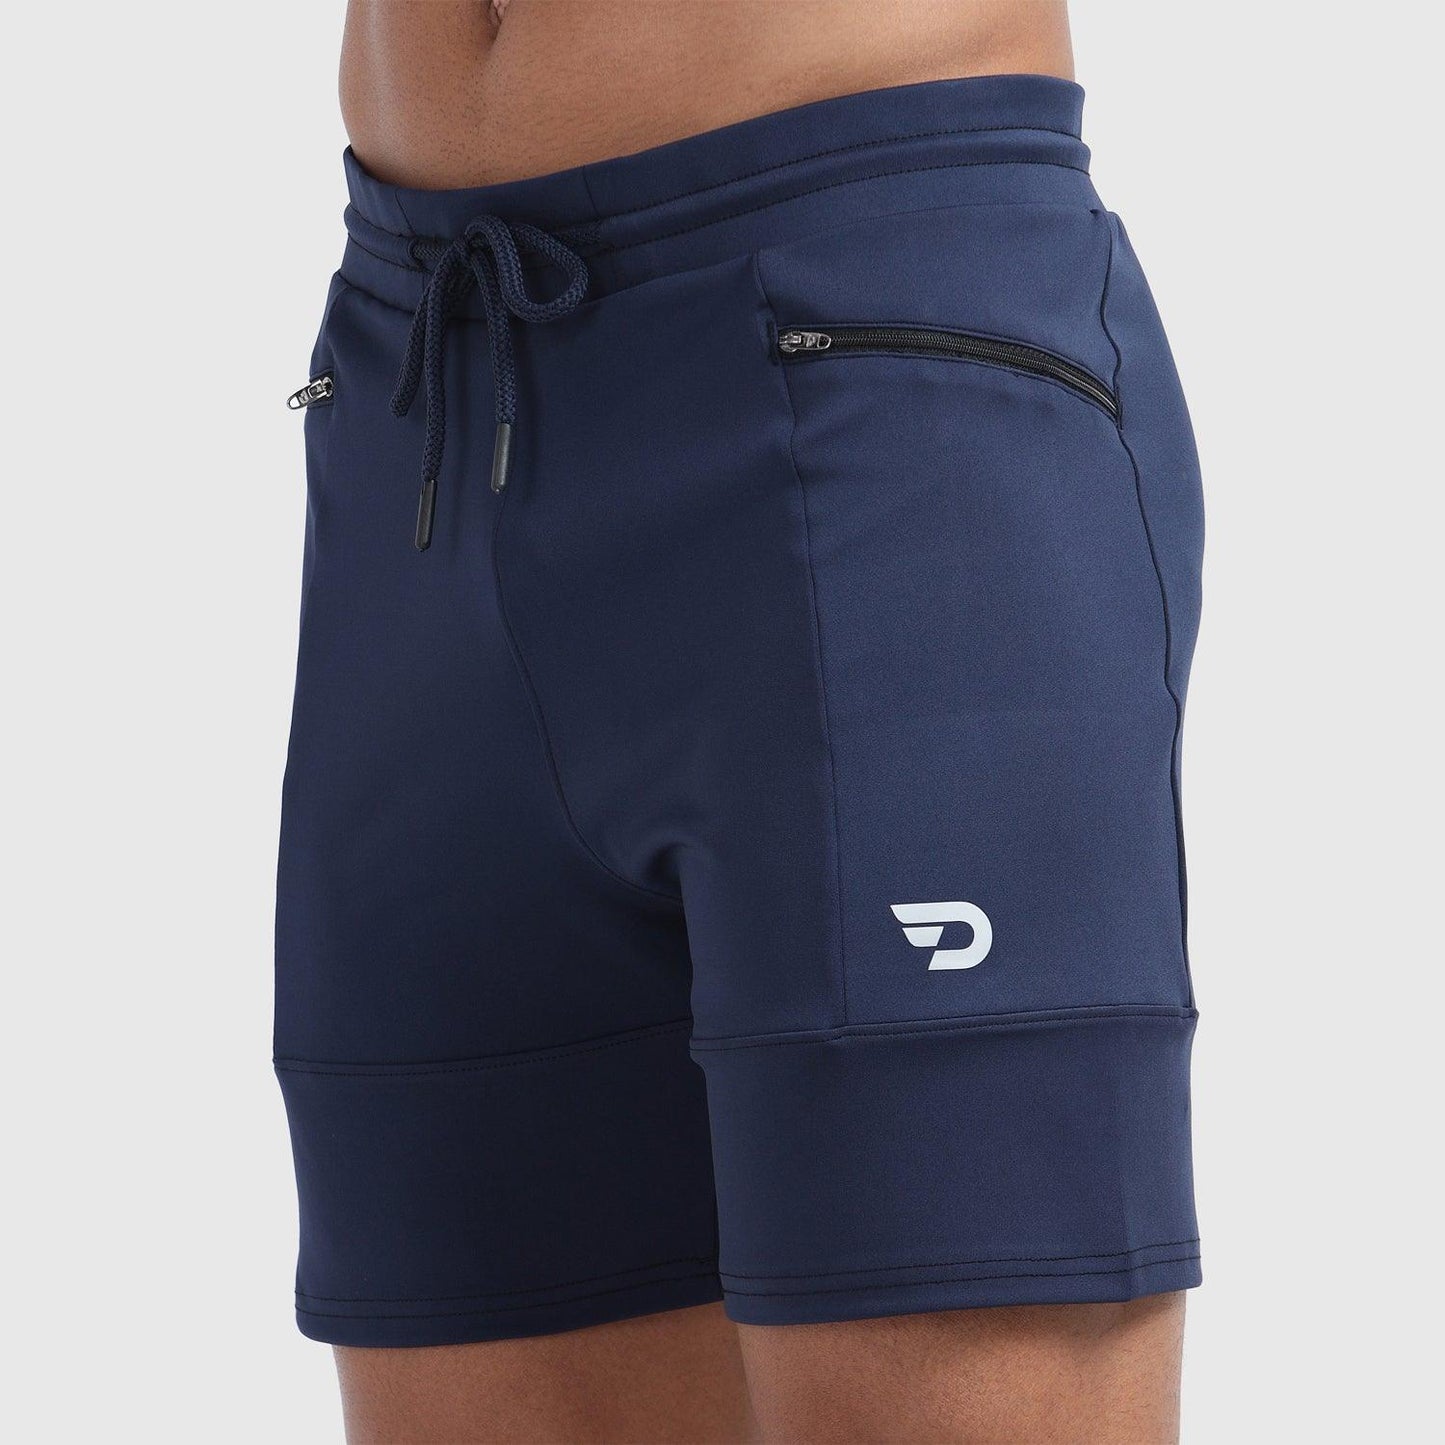 Denmonk's fashionable Power Shorts midnight navy shorts for men will boost your level of gym fitness.